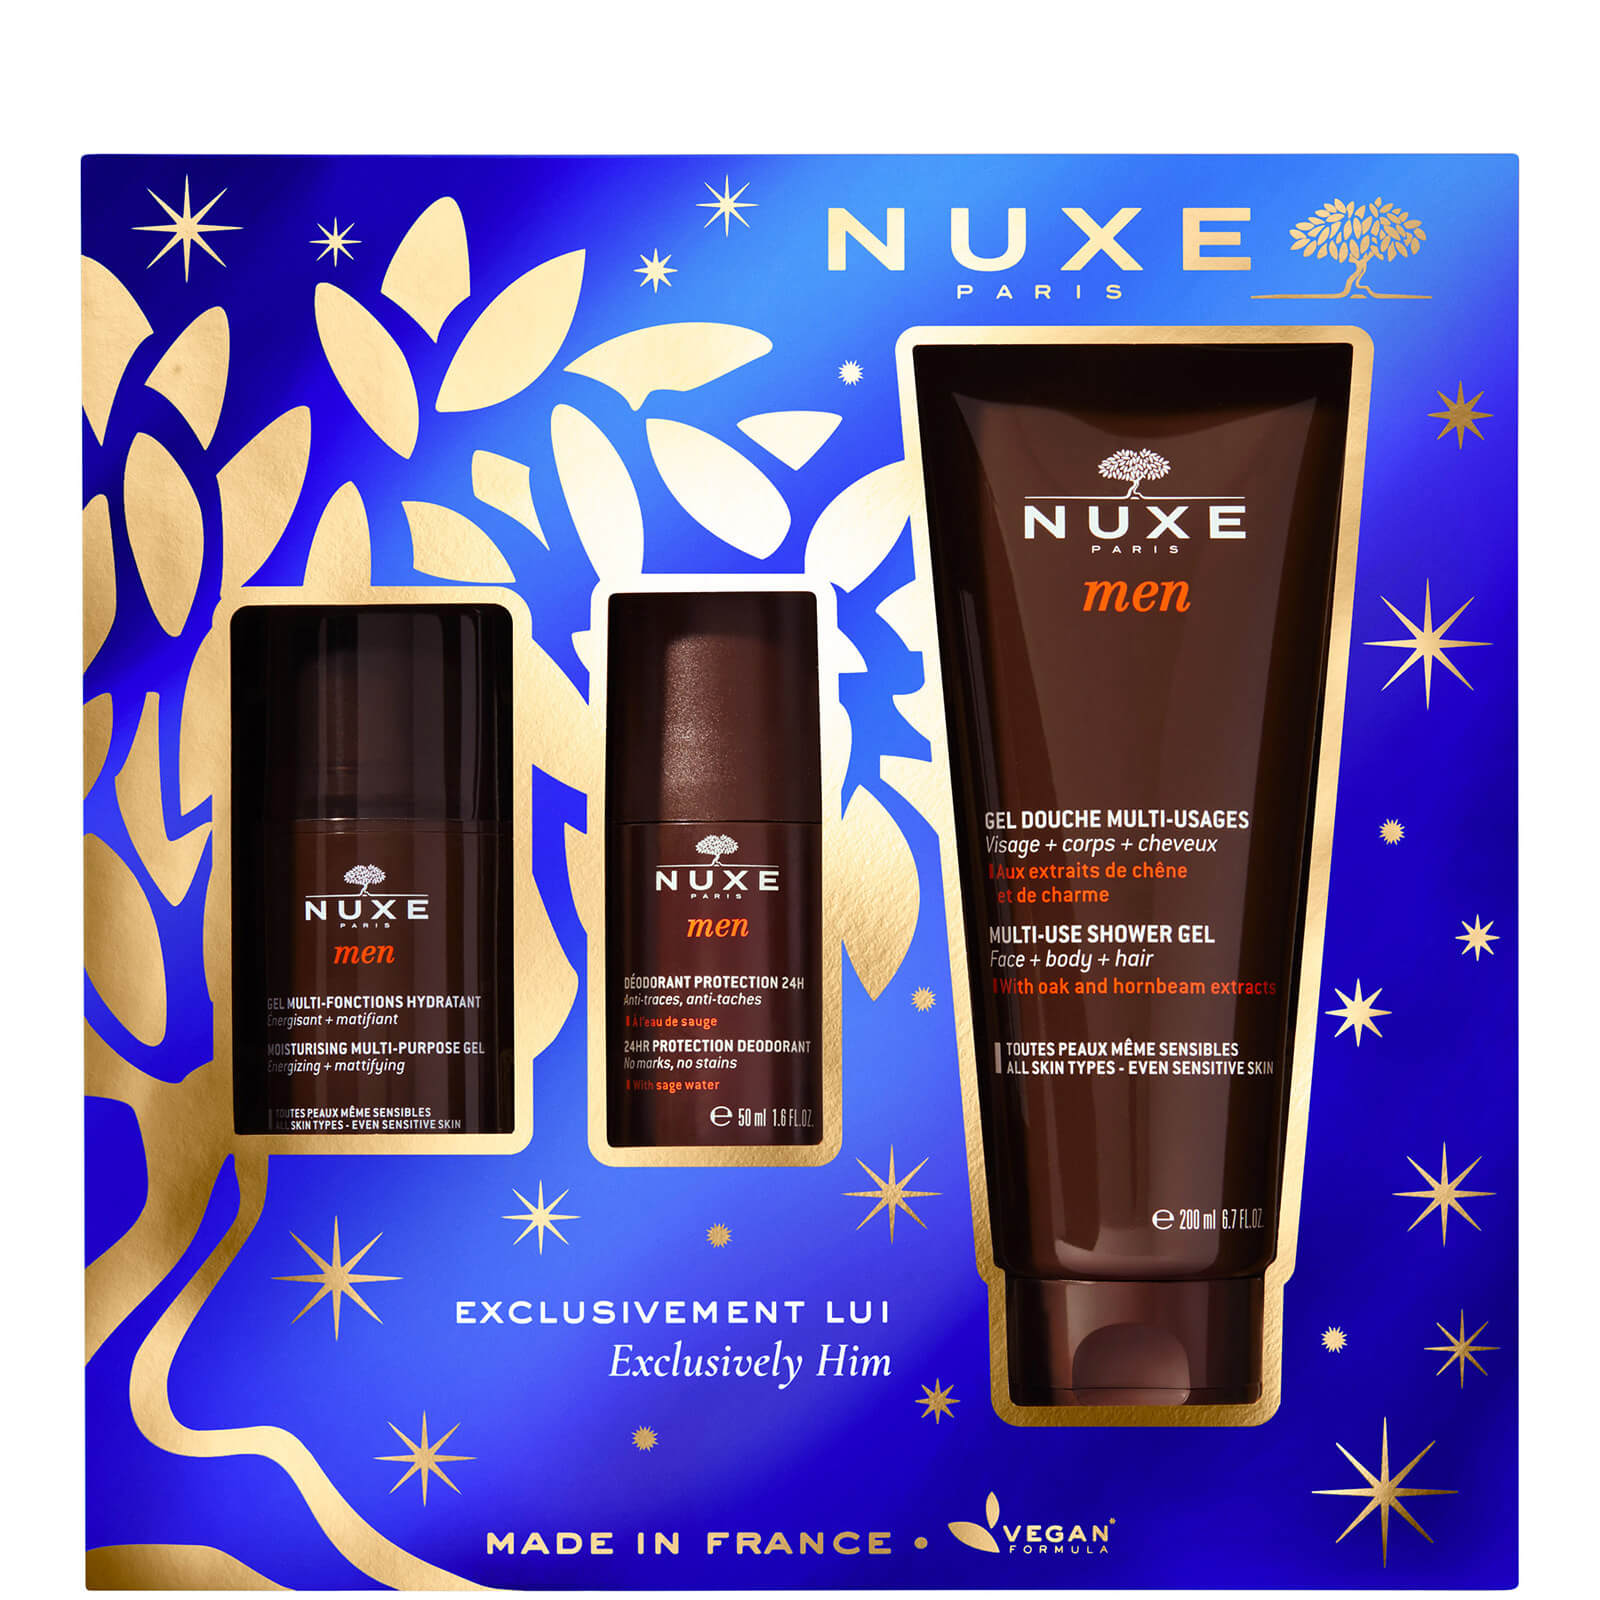 Nuxe Men A Gift Set Just For Him (Worth £41.50)